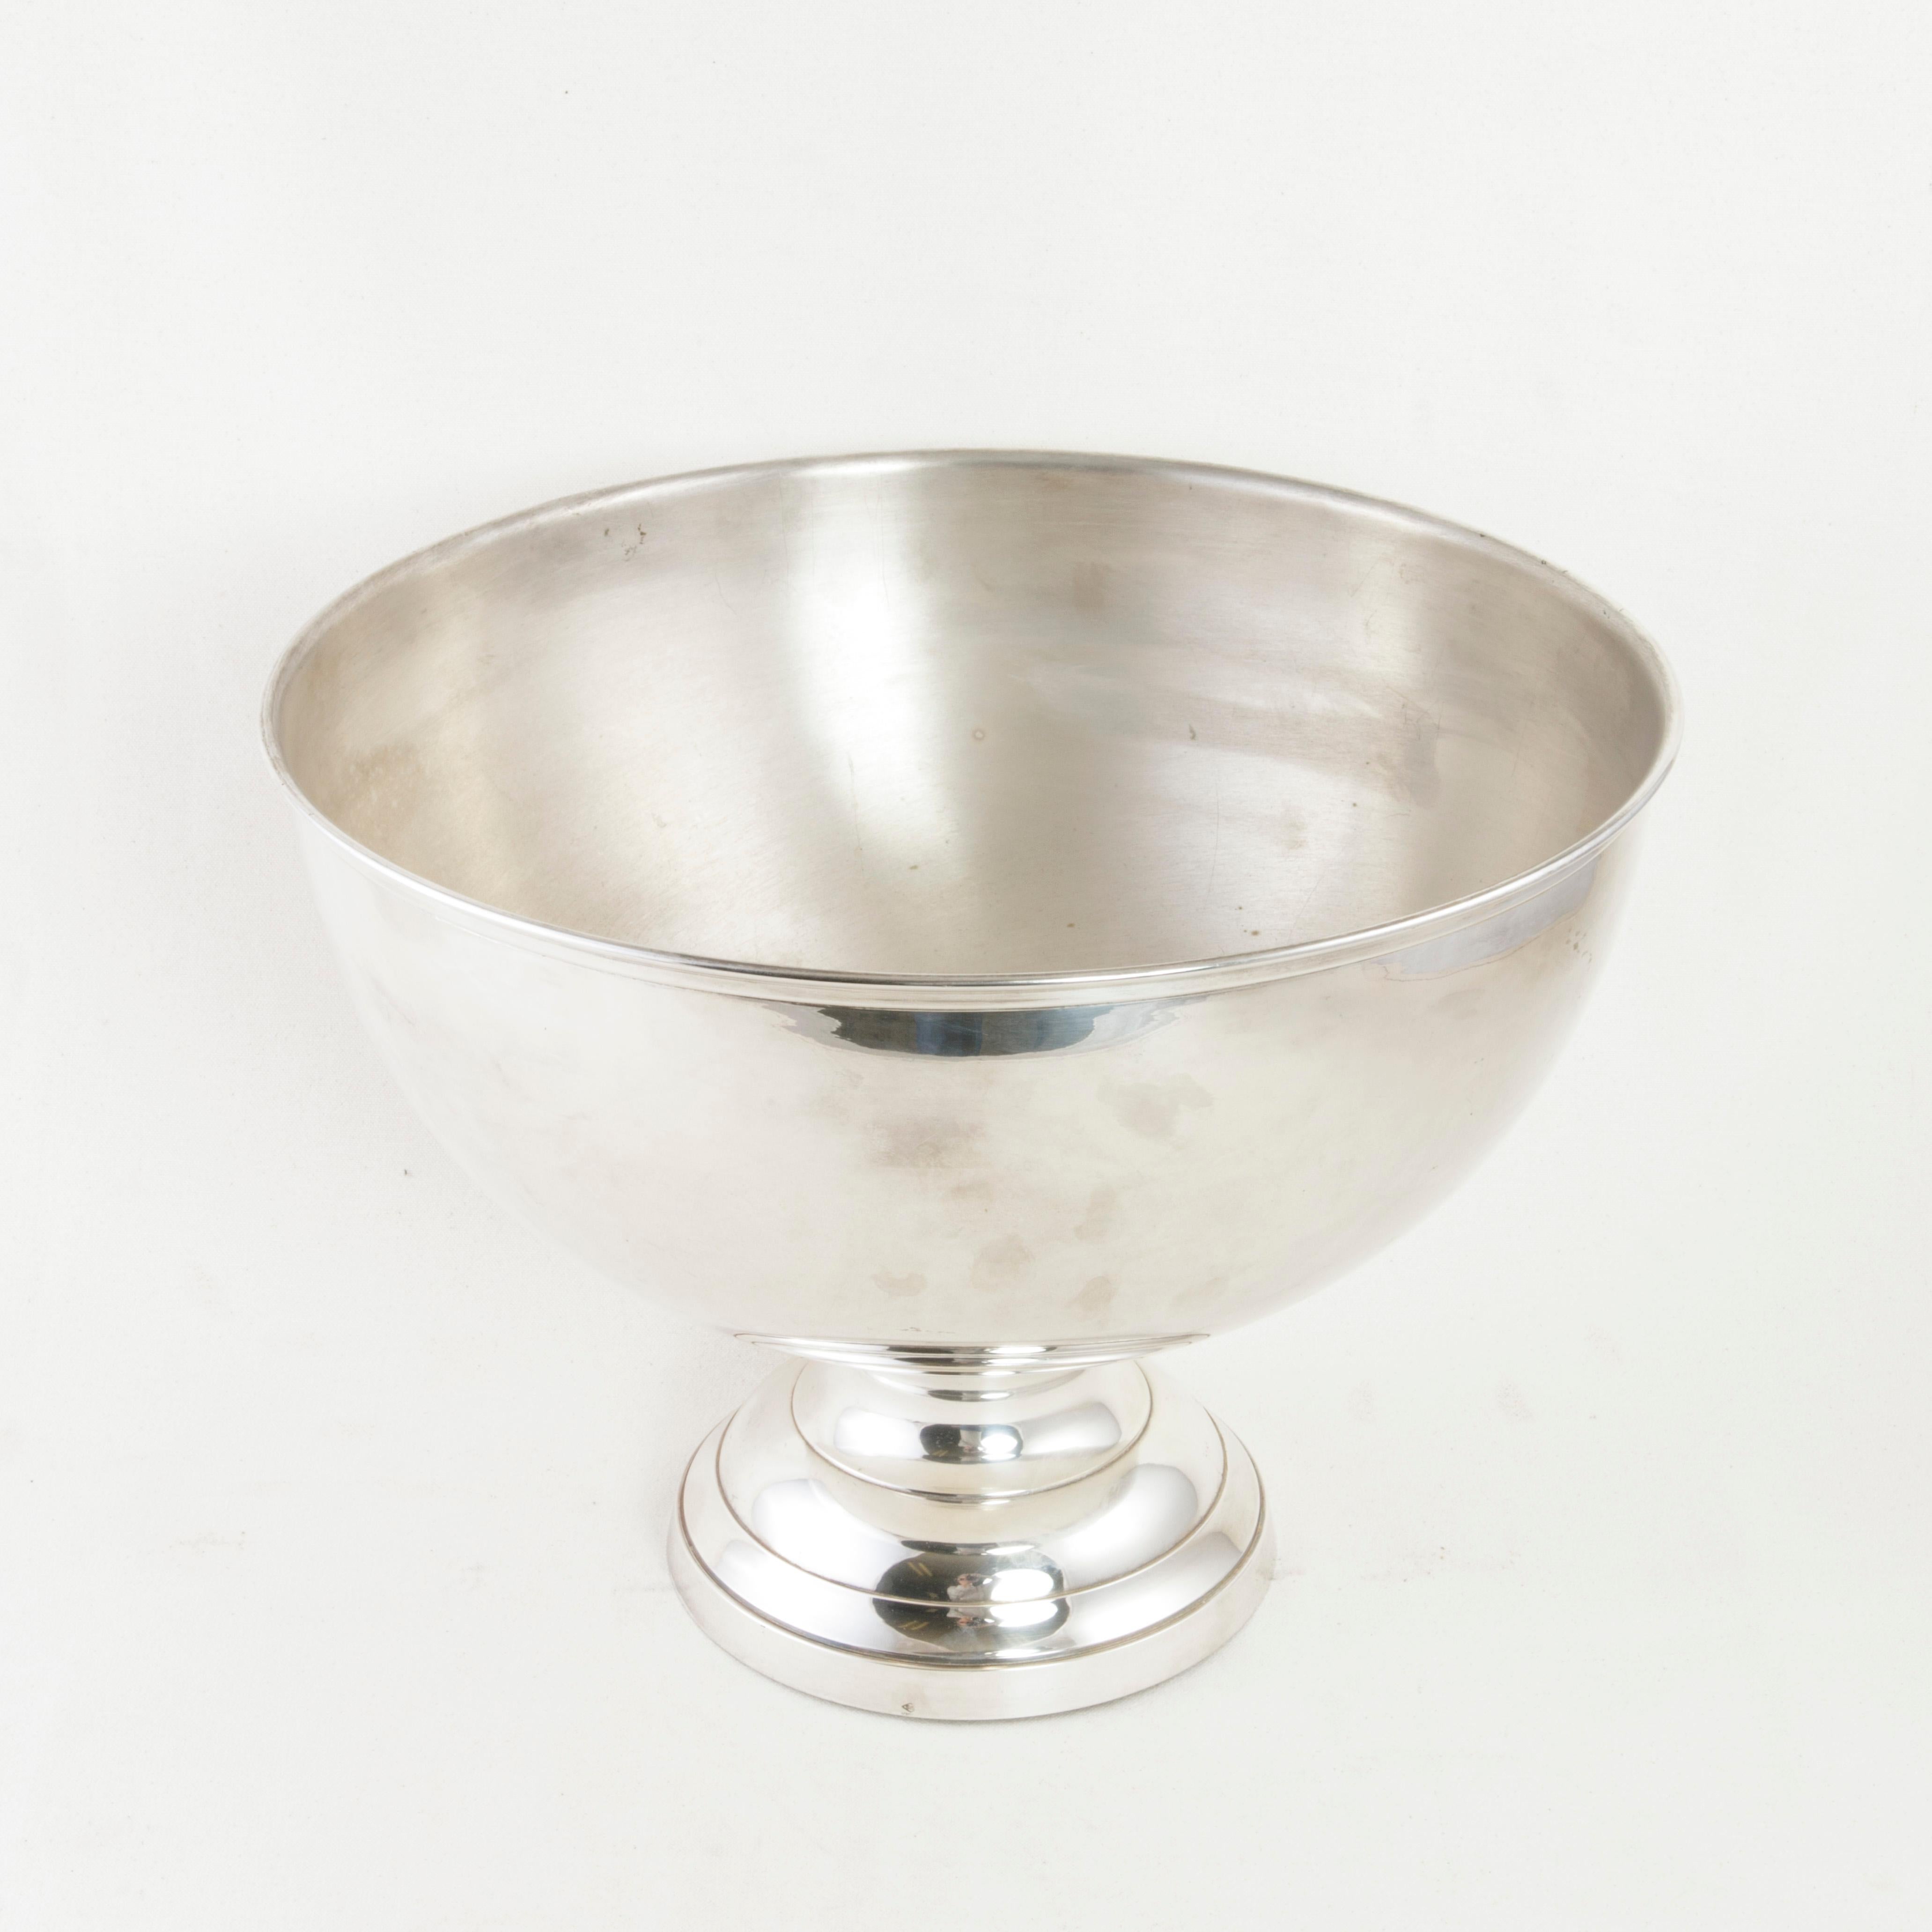 Midcentury French Silver Plate Footed Hotel Champagne Bucket with Insert 1